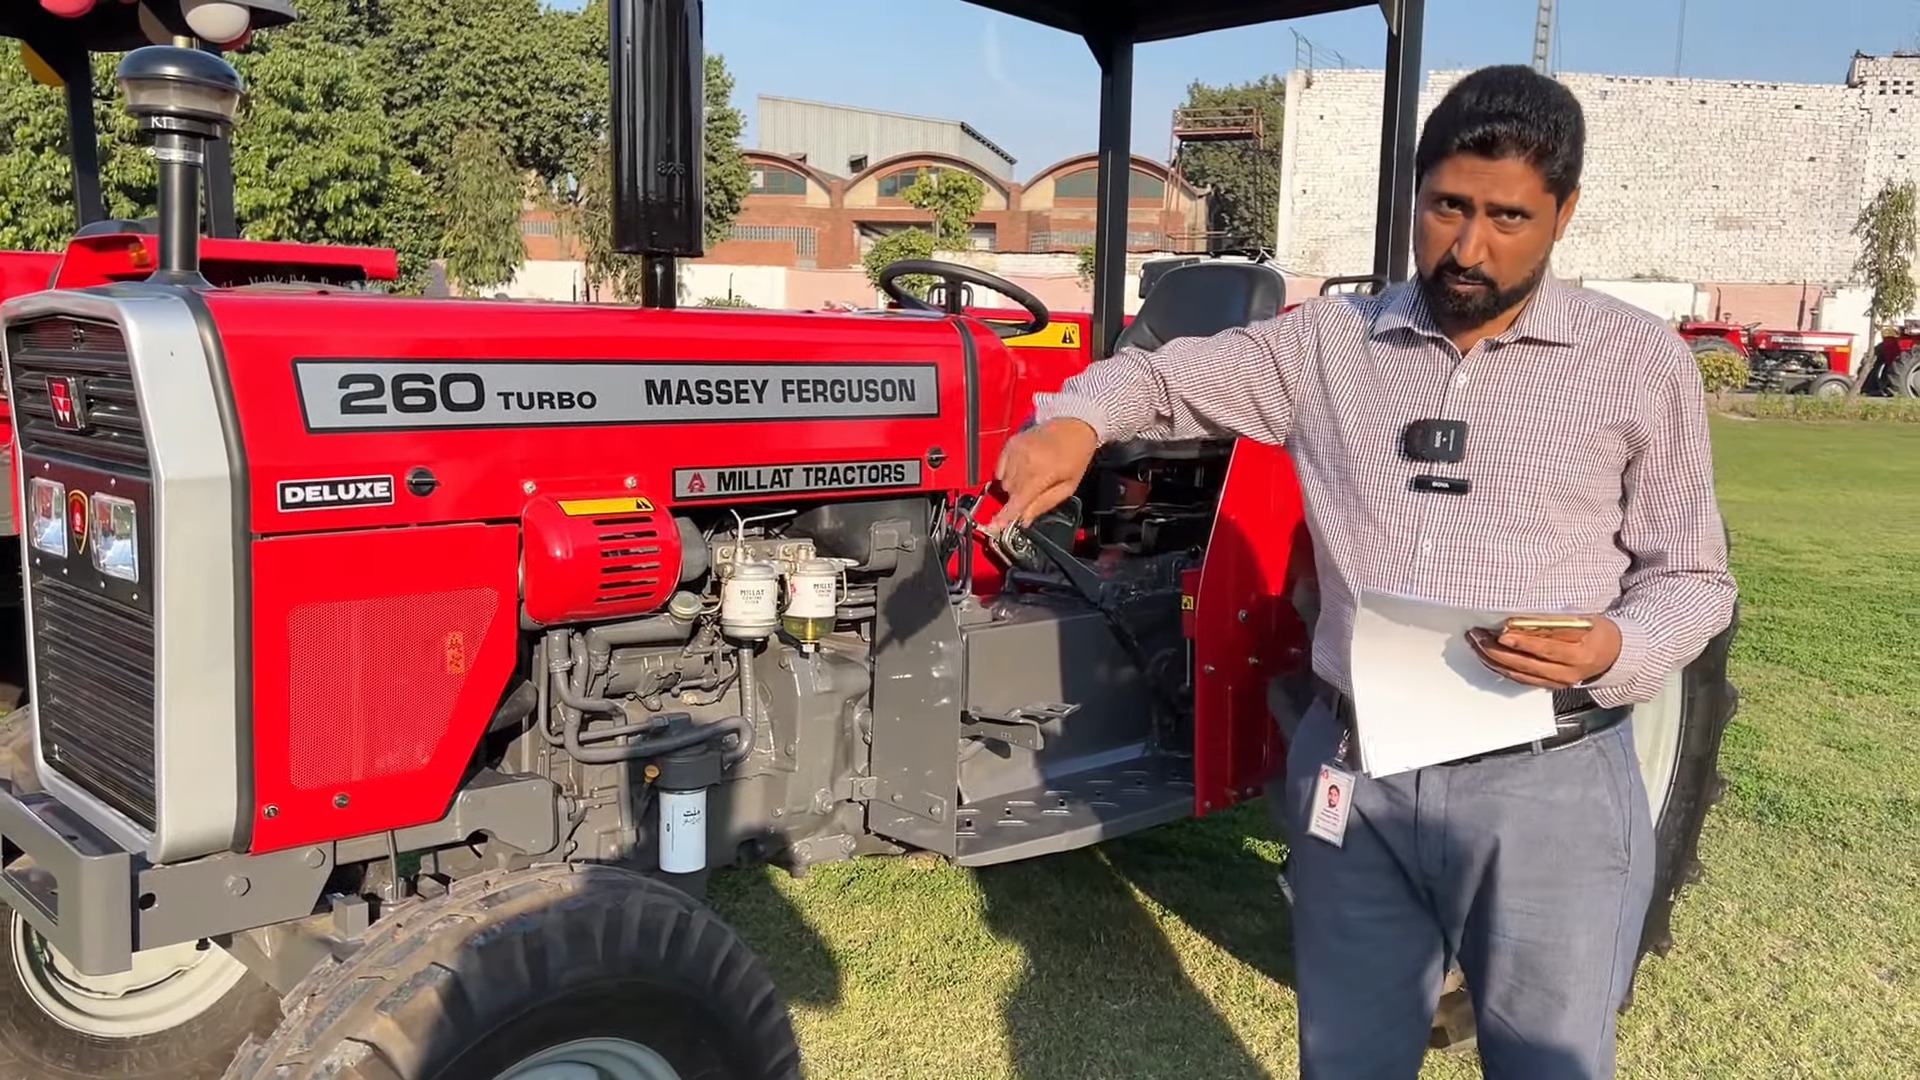 A brand-new Massey Ferguson MF 260 Deluxe tractor, showcasing its upgraded hydrostatic power steering and enhanced front design, parked in a sunny field.